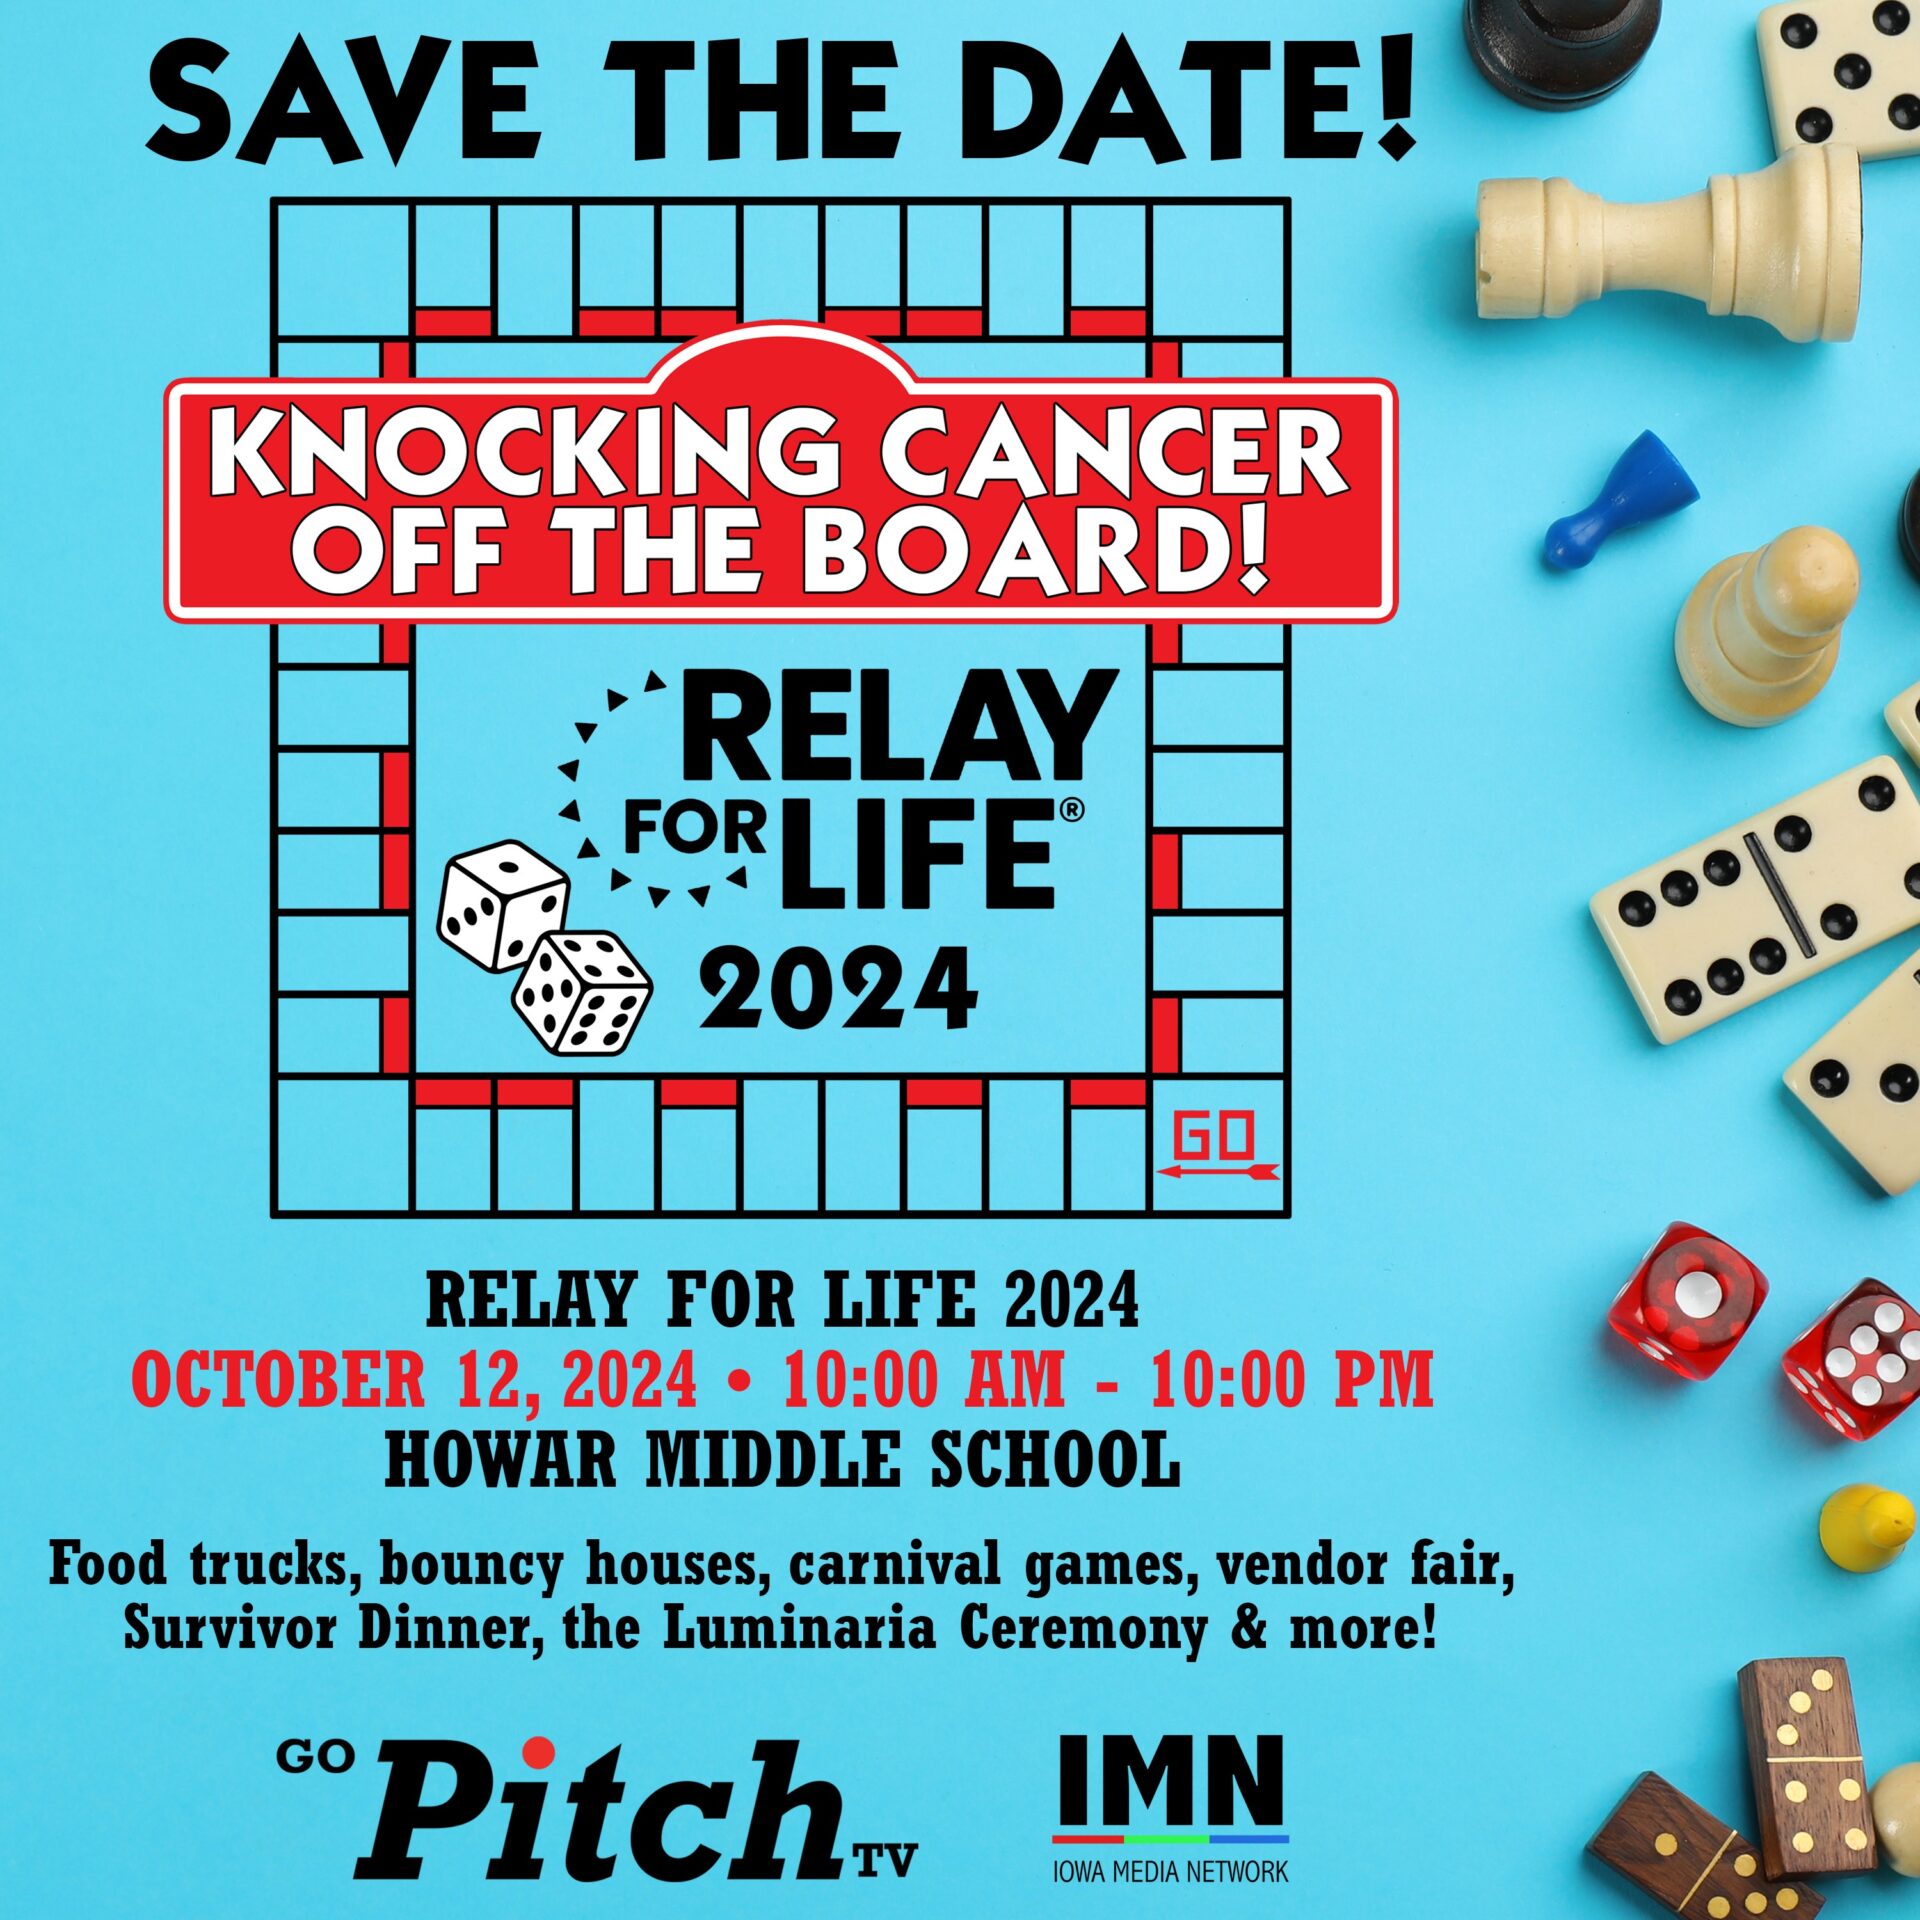 Relay for Life 2024 Save the Date